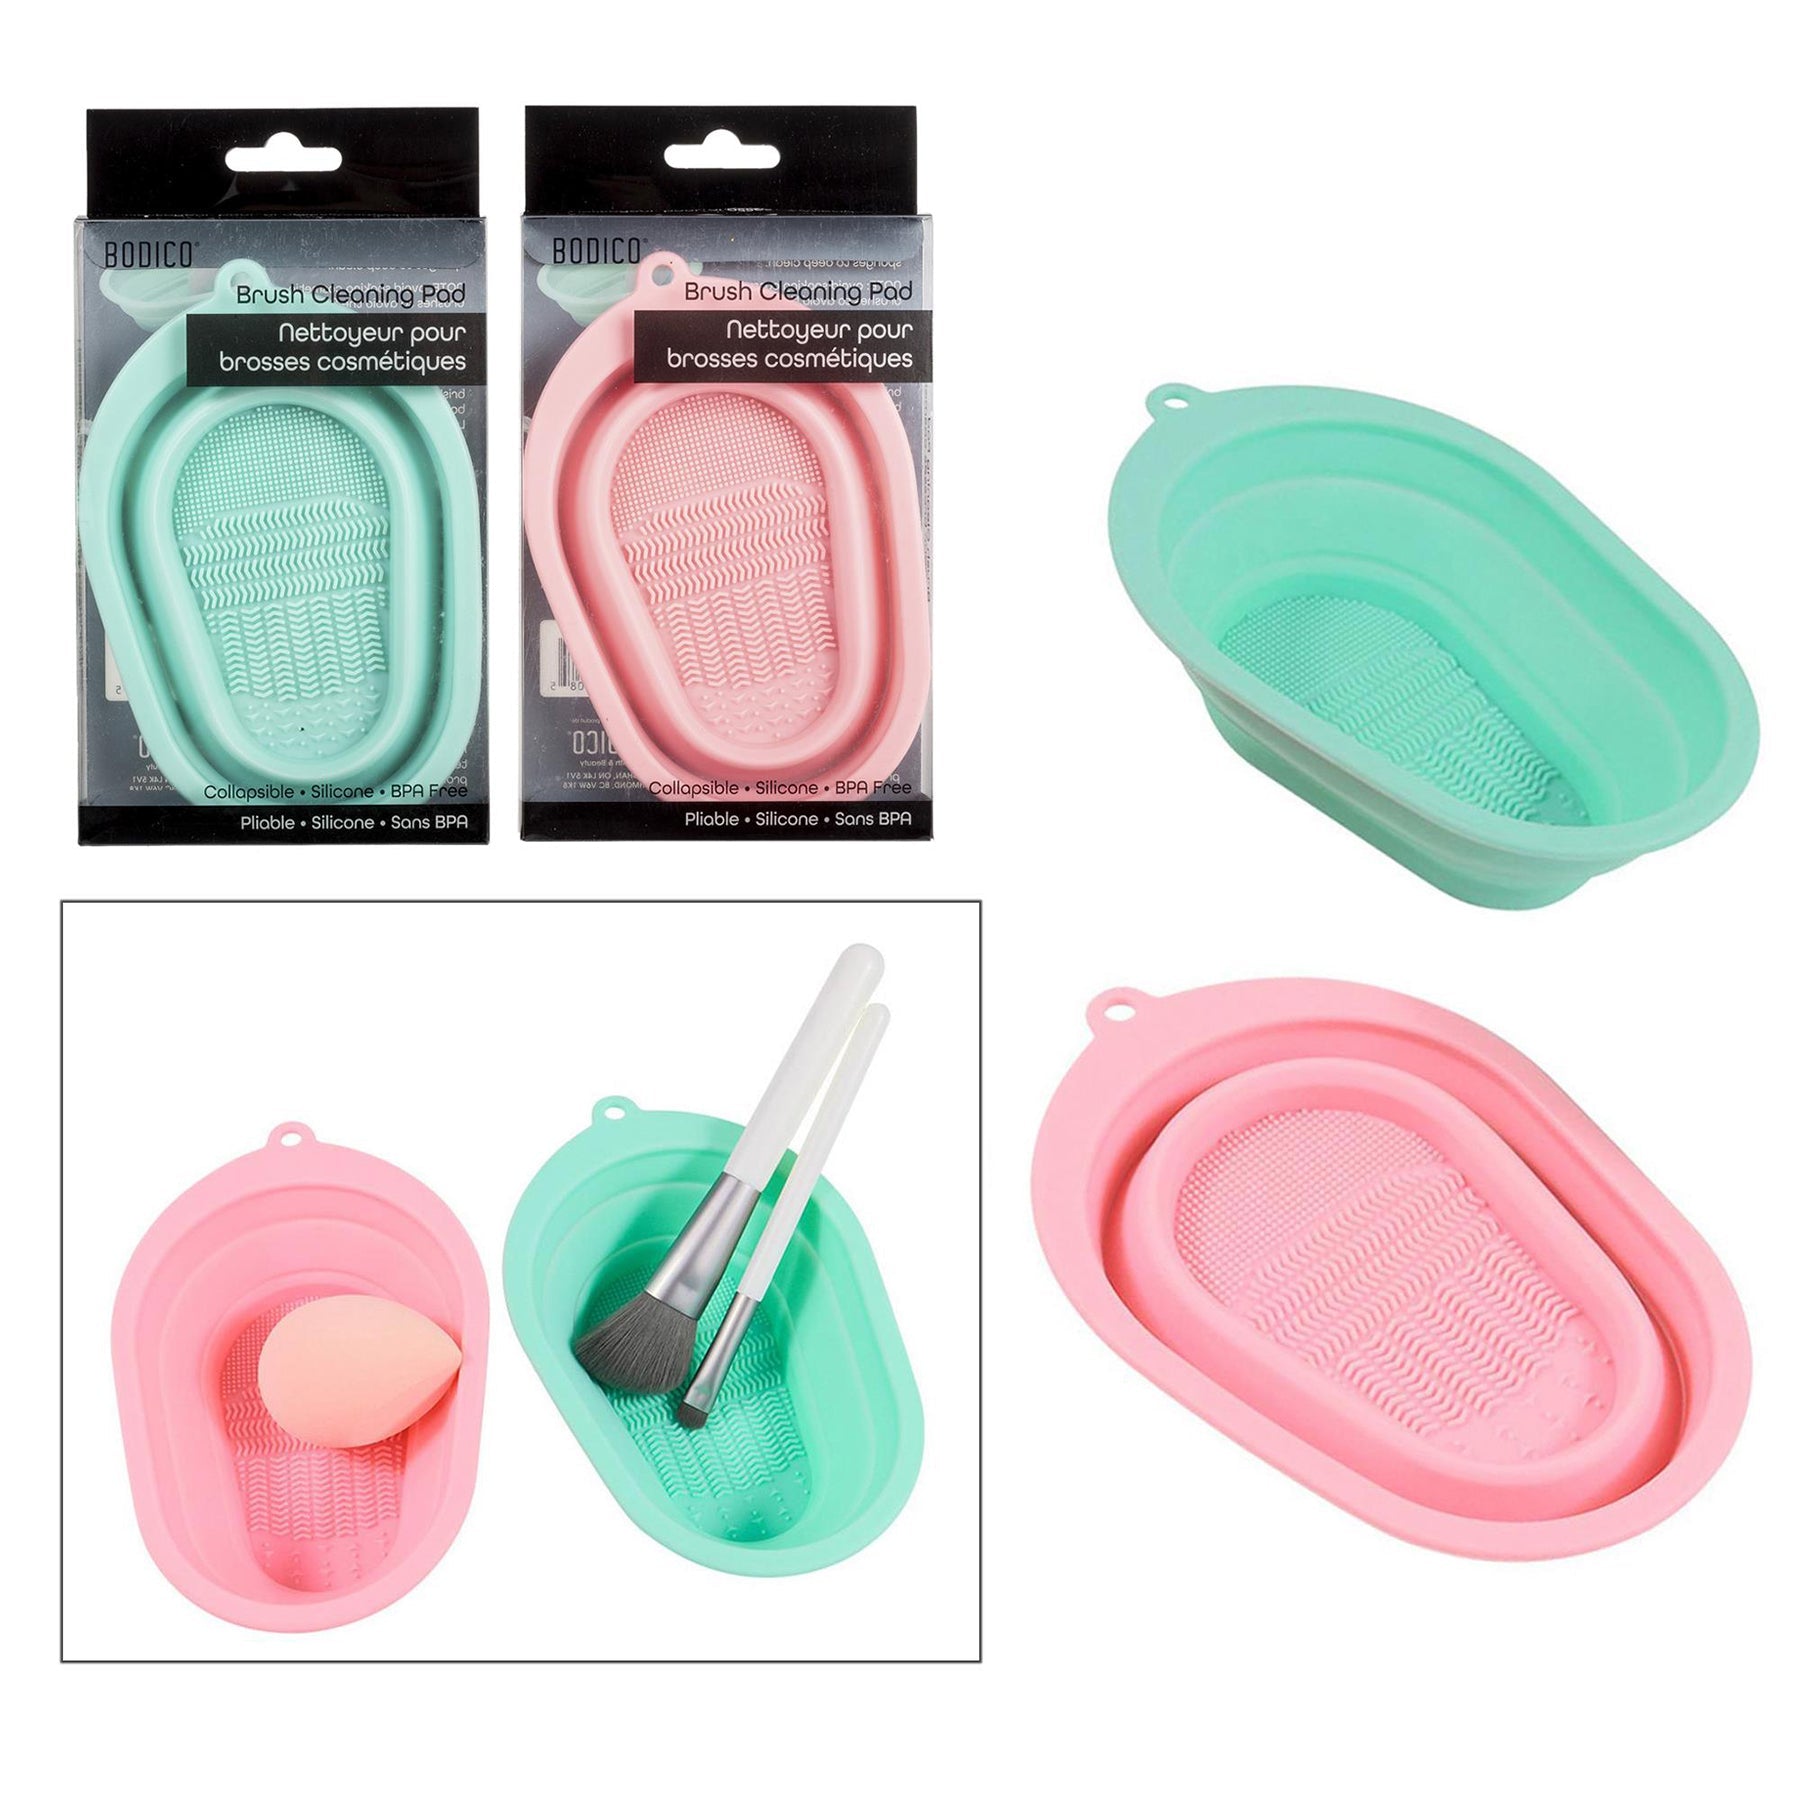 Bodico Brush Cleaning Bowl Collapsible Silicone 6x4x1.6in